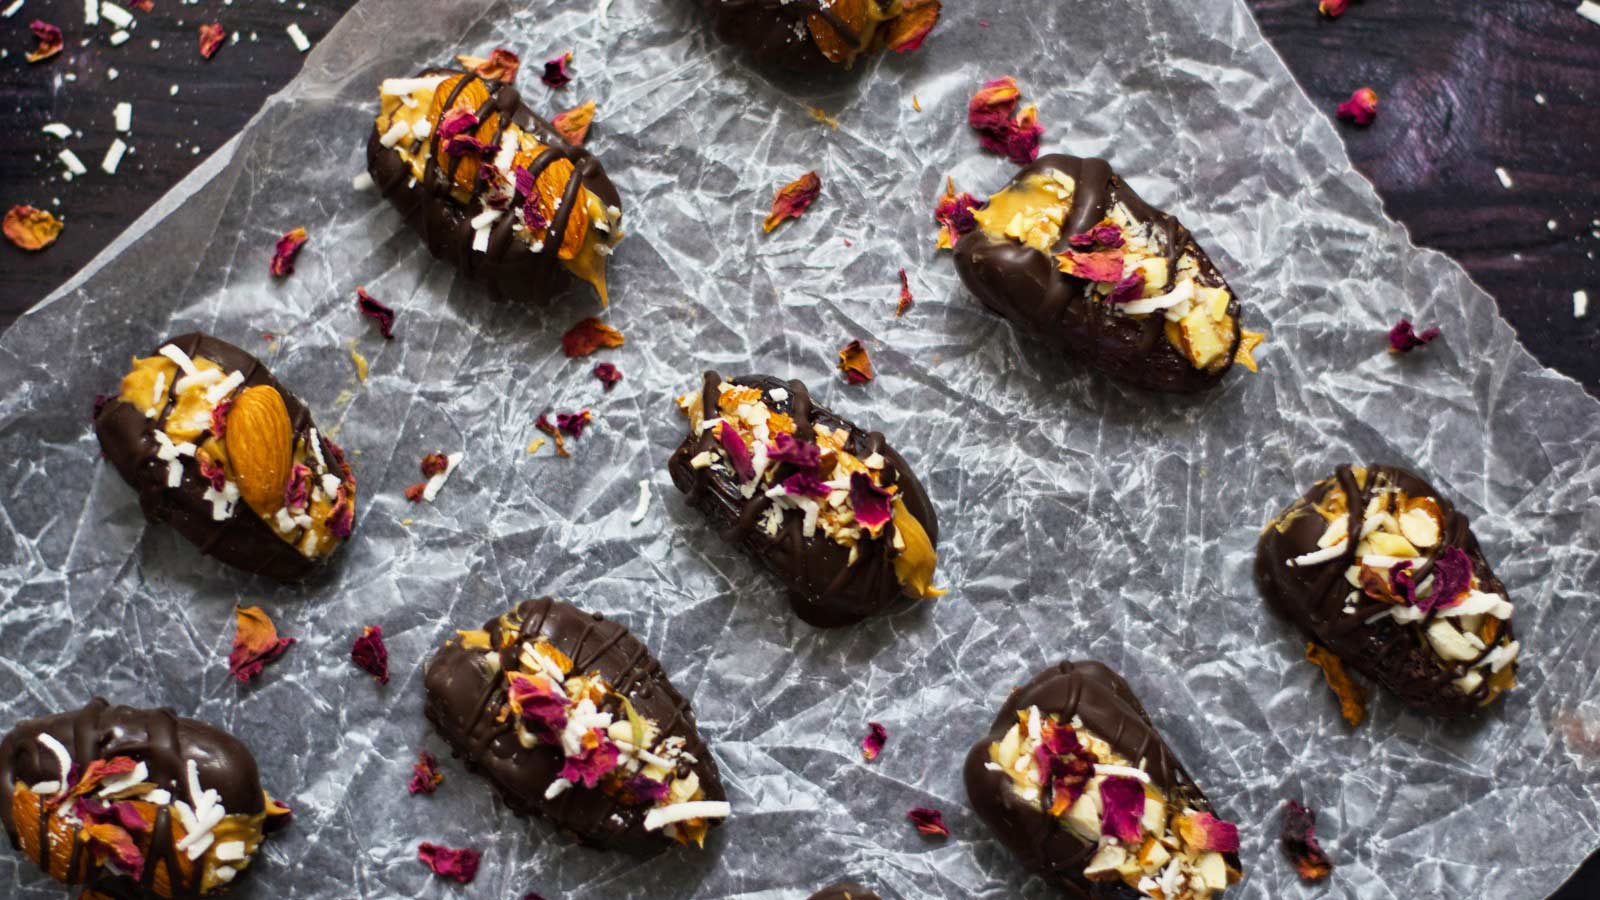 <p>This simple <a href="https://www.thegraciouspantry.com/clean-eating-stuffed-dates/">stuffed date recipe</a> is an easy, healthier way to get a quick dessert on the table. You can make them as simple or as fancy as you want, but no matter what you do, they are fast, and guests love them.</p>